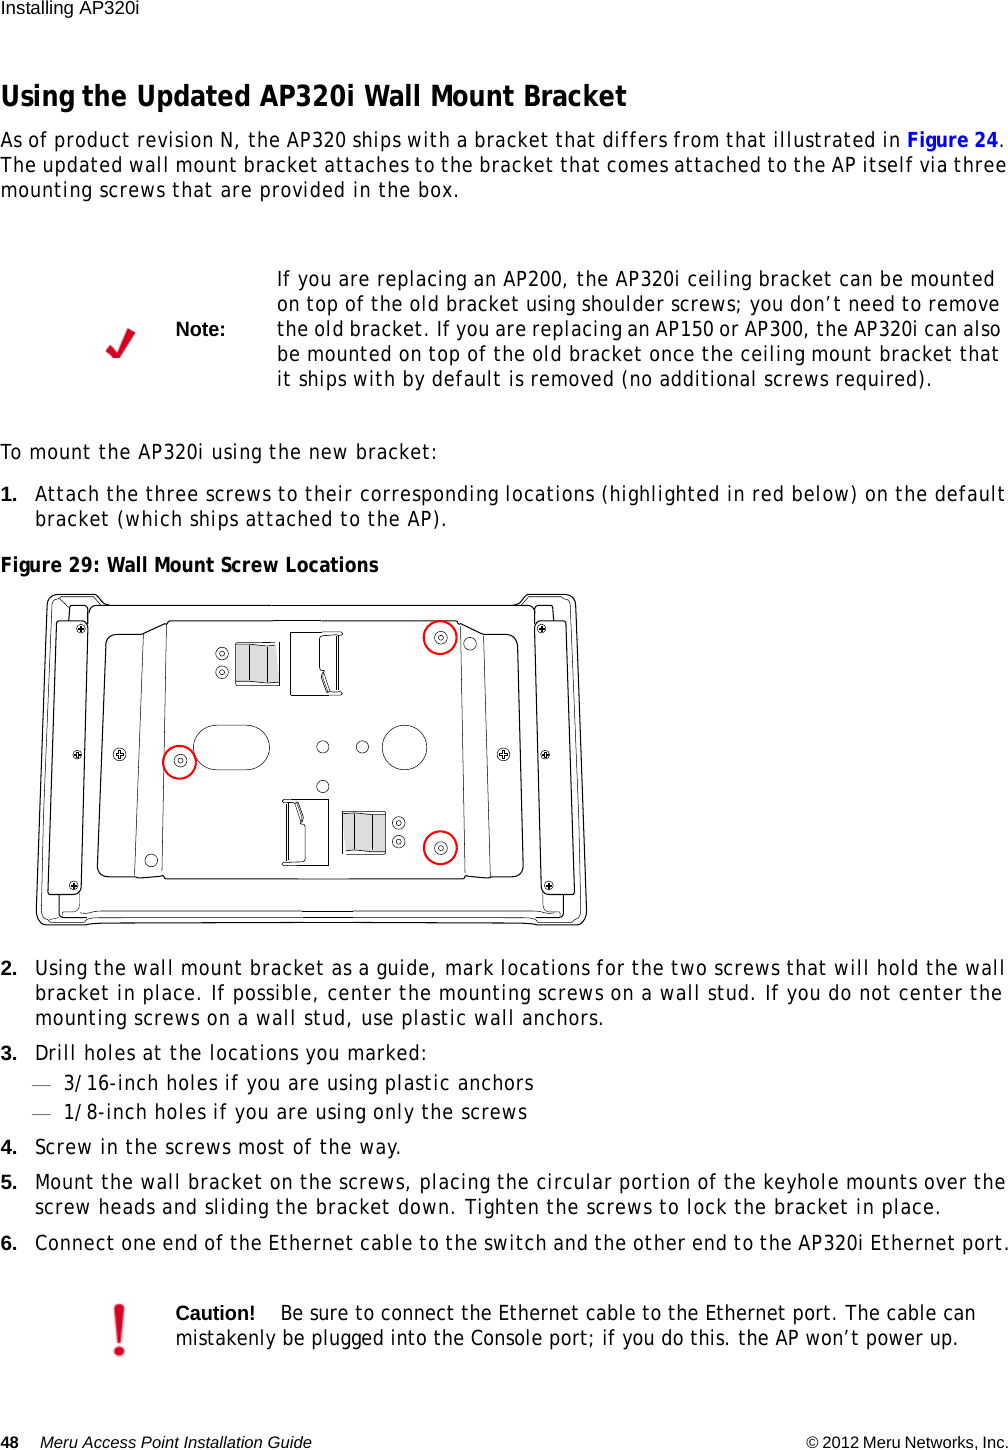 48 Meru Access Point Installation Guide © 2012 Meru Networks, Inc. Installing AP320i Using the Updated AP320i Wall Mount BracketAs of product revision N, the AP320 ships with a bracket that differs from that illustrated in Figure 24. The updated wall mount bracket attaches to the bracket that comes attached to the AP itself via three mounting screws that are provided in the box.To mount the AP320i using the new bracket:1. Attach the three screws to their corresponding locations (highlighted in red below) on the default bracket (which ships attached to the AP).Figure 29: Wall Mount Screw Locations2. Using the wall mount bracket as a guide, mark locations for the two screws that will hold the wall bracket in place. If possible, center the mounting screws on a wall stud. If you do not center the mounting screws on a wall stud, use plastic wall anchors.3. Drill holes at the locations you marked:—3/16-inch holes if you are using plastic anchors—1/8-inch holes if you are using only the screws4. Screw in the screws most of the way.5. Mount the wall bracket on the screws, placing the circular portion of the keyhole mounts over the screw heads and sliding the bracket down. Tighten the screws to lock the bracket in place.6. Connect one end of the Ethernet cable to the switch and the other end to the AP320i Ethernet port.Note:If you are replacing an AP200, the AP320i ceiling bracket can be mounted on top of the old bracket using shoulder screws; you don’t need to remove the old bracket. If you are replacing an AP150 or AP300, the AP320i can also be mounted on top of the old bracket once the ceiling mount bracket that it ships with by default is removed (no additional screws required).Caution!Be sure to connect the Ethernet cable to the Ethernet port. The cable can mistakenly be plugged into the Console port; if you do this. the AP won’t power up.